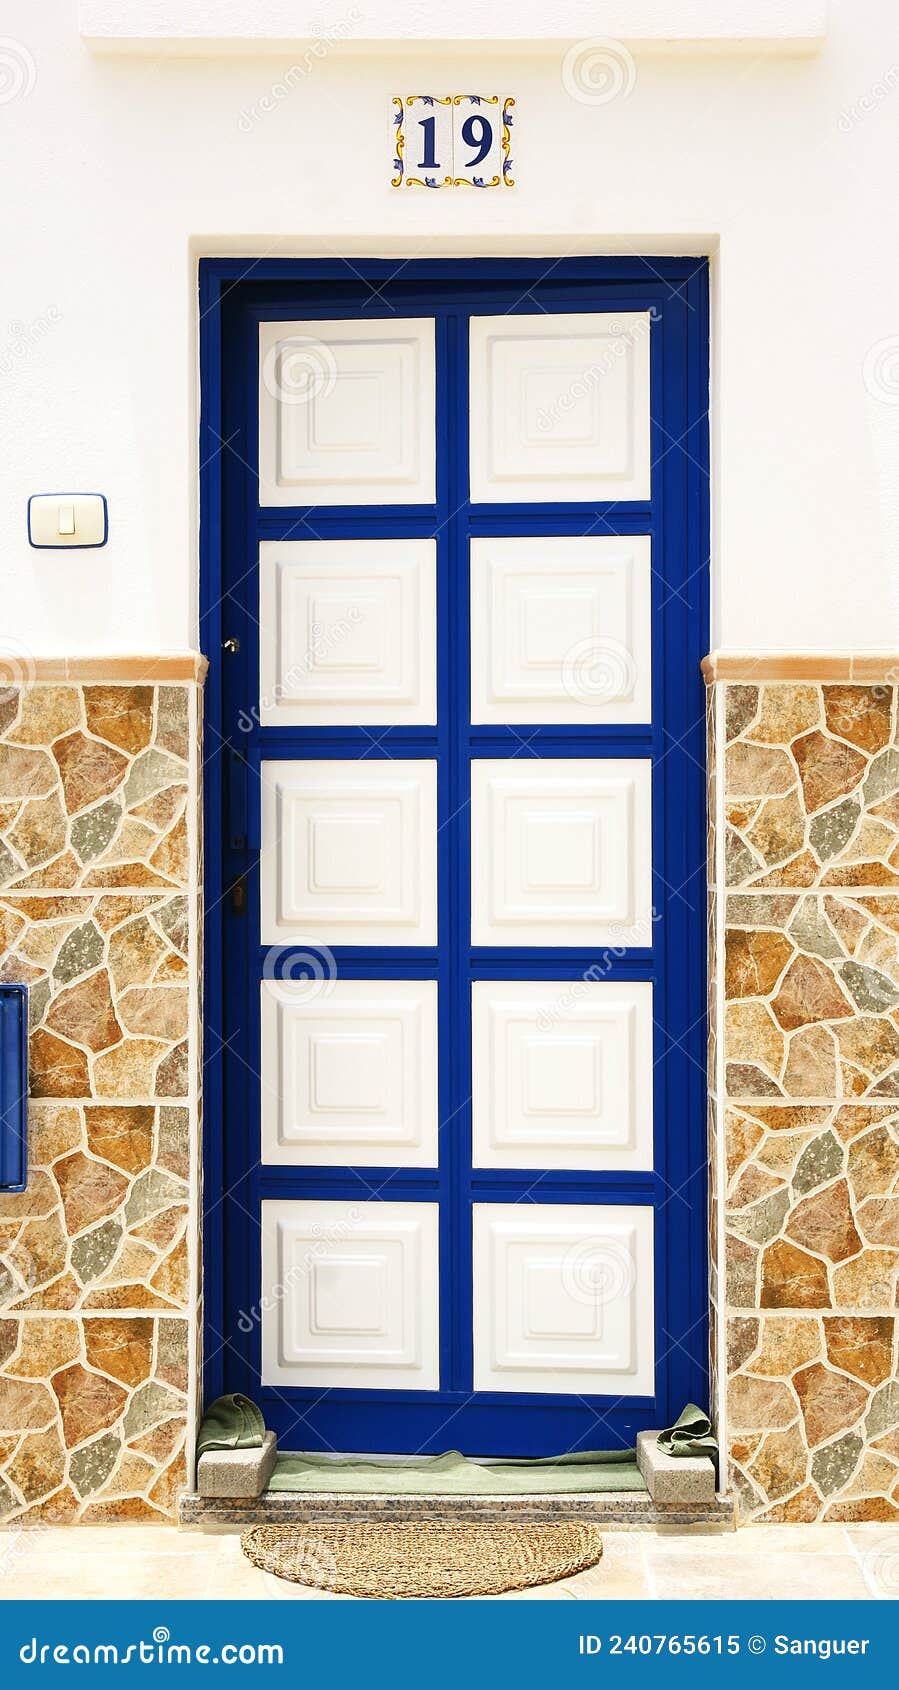 door with white squares framed in blue in a building in la graciosa